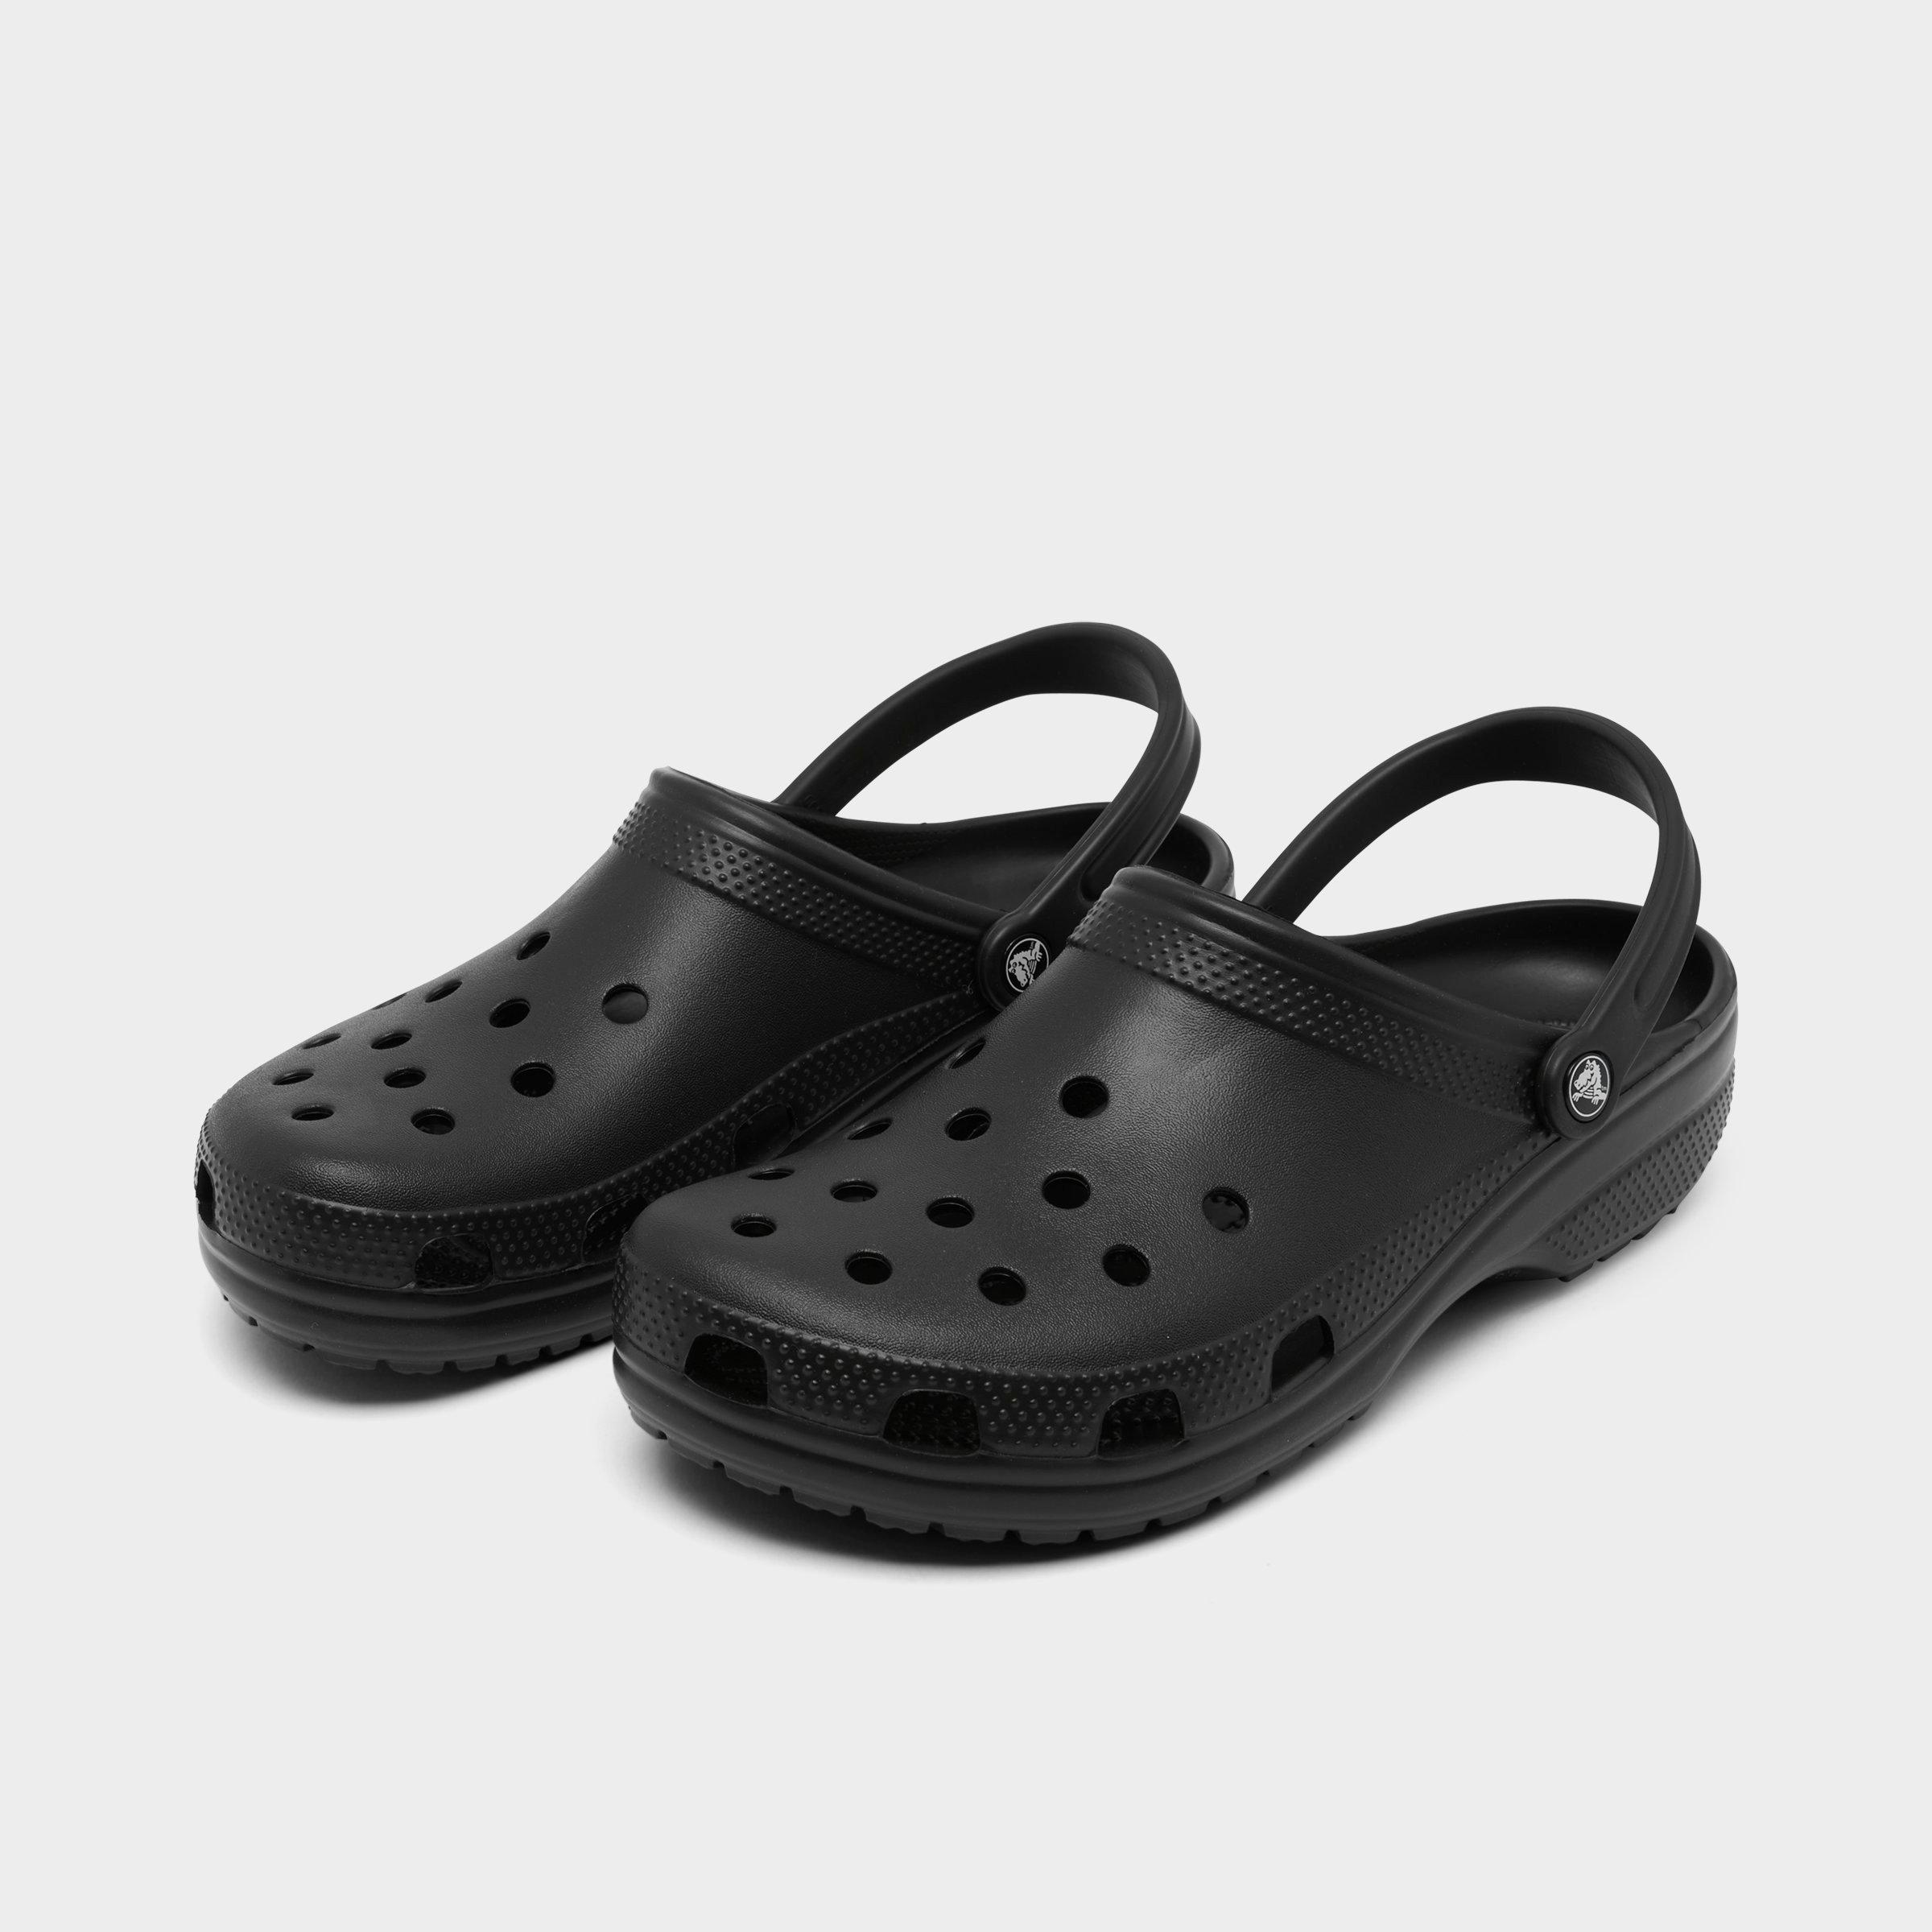 crocs afterpay Online shopping has 